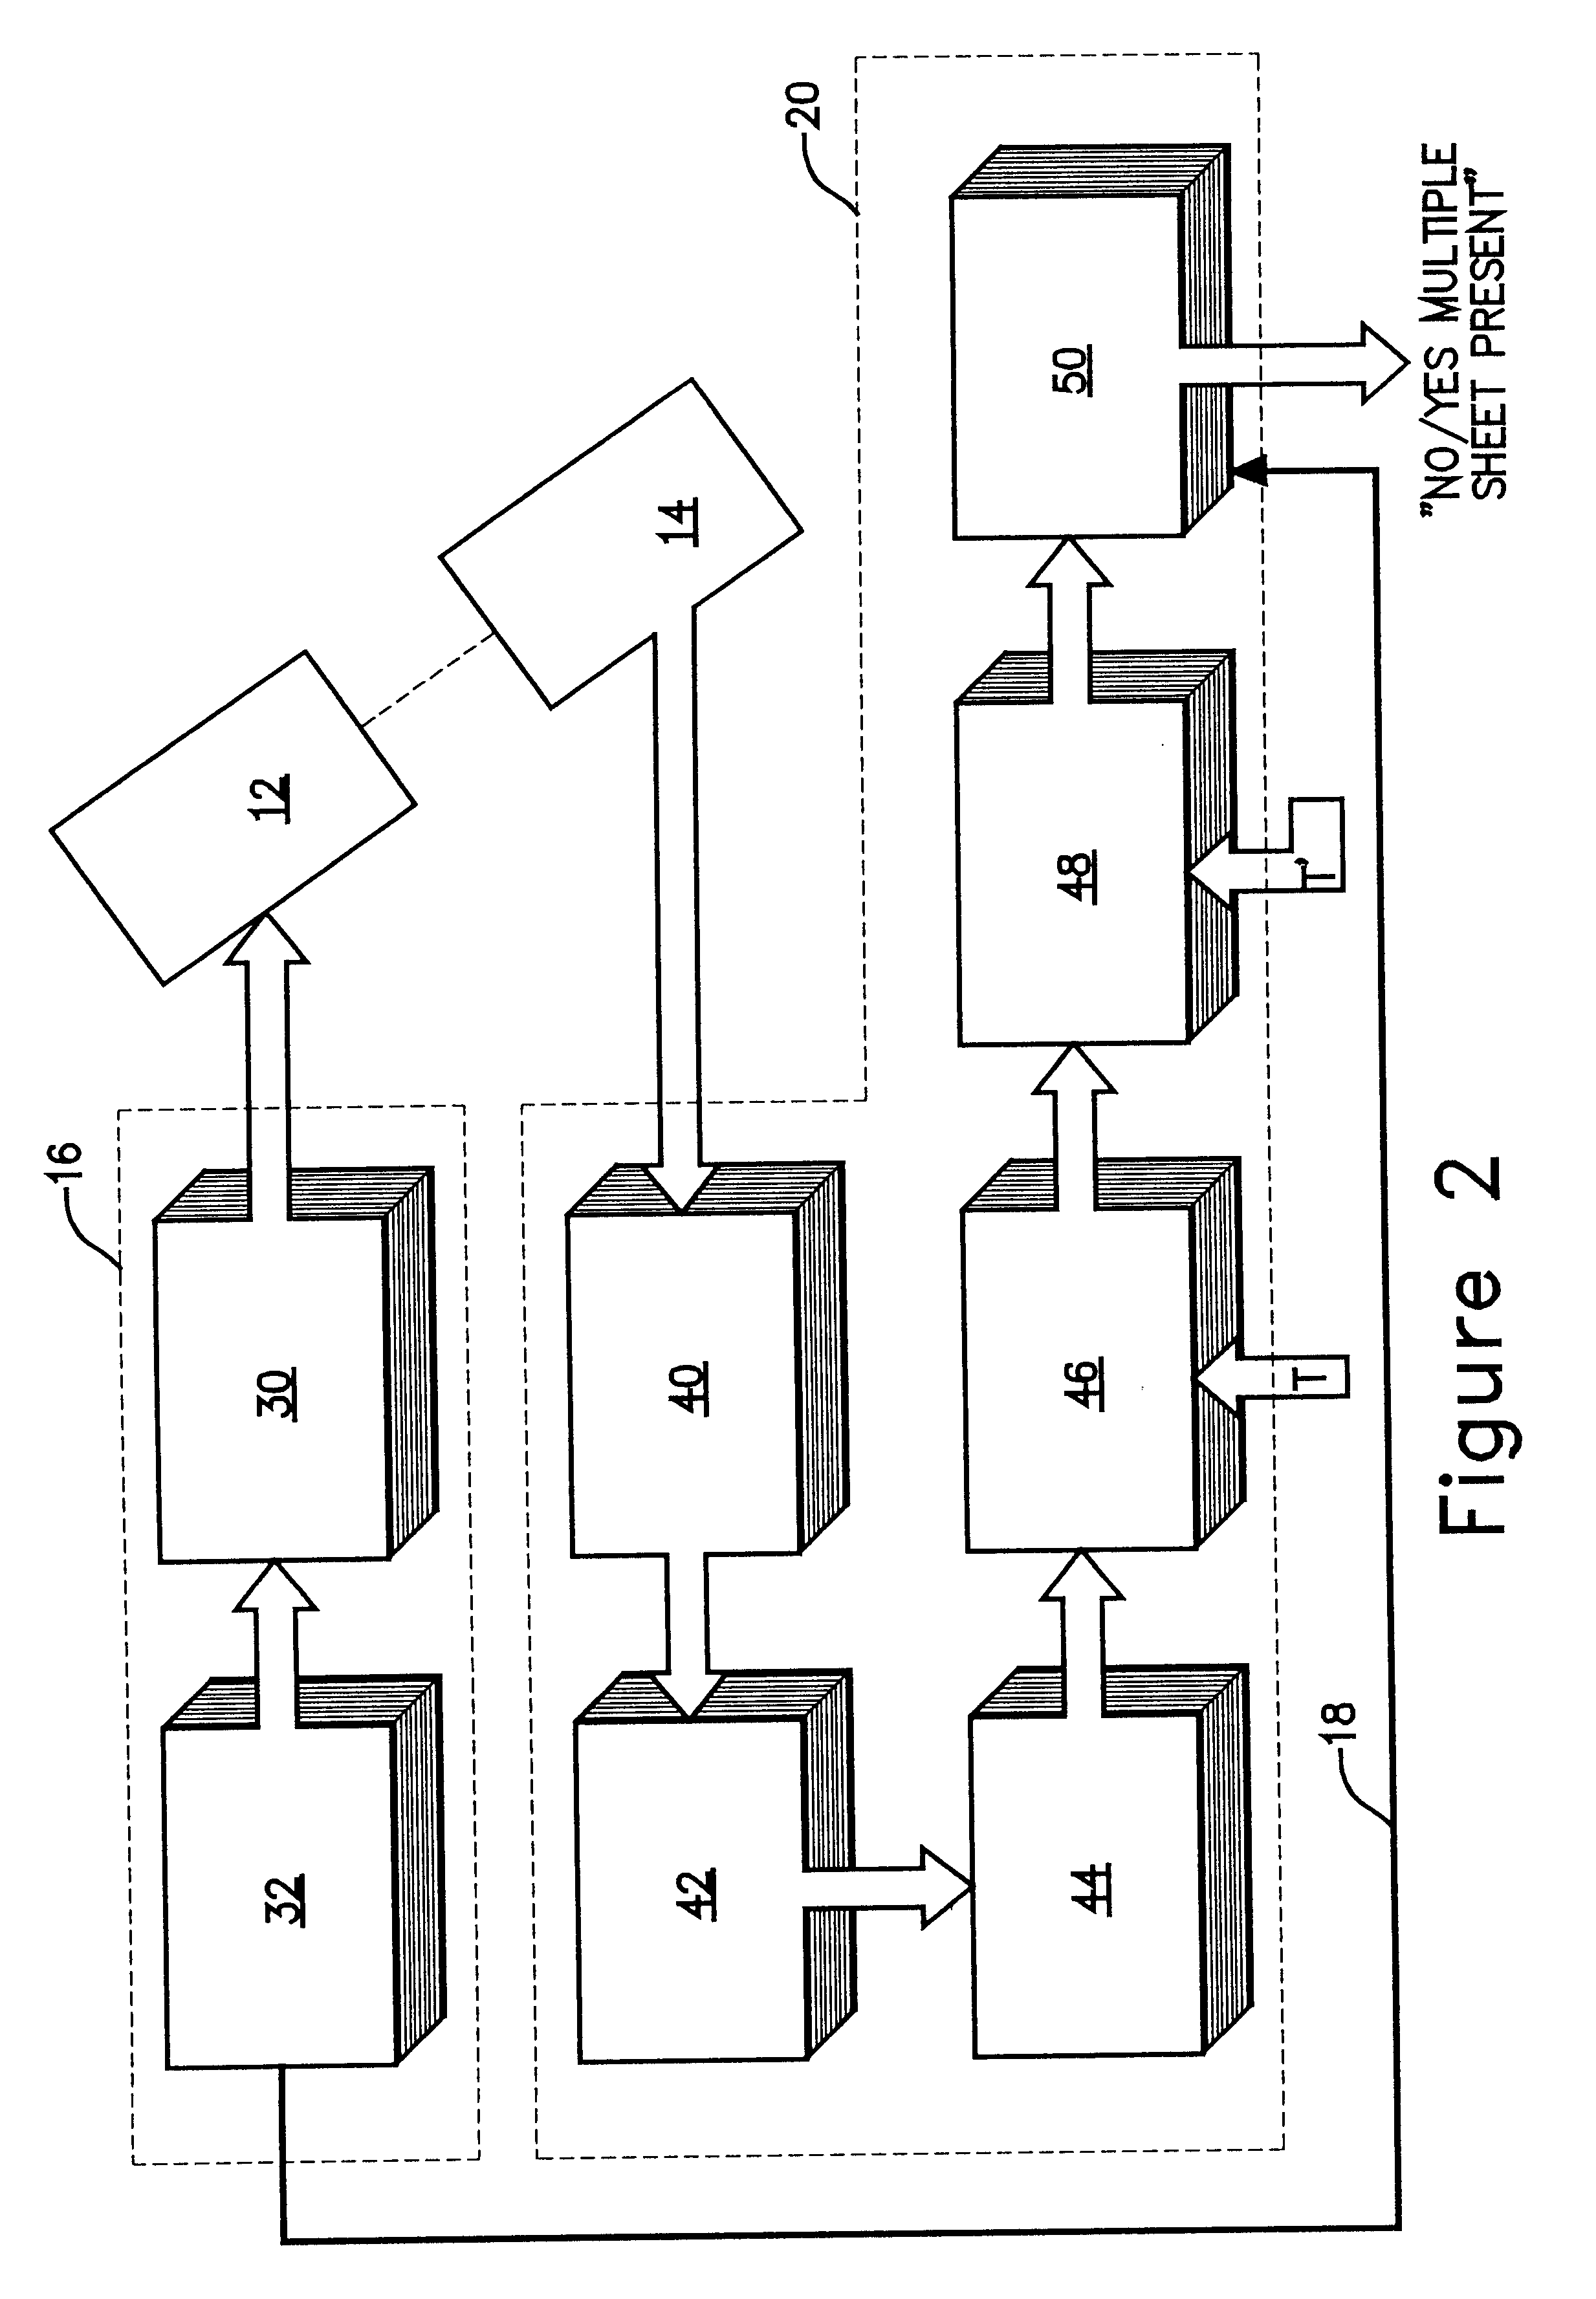 Method and apparatus for plural document detection